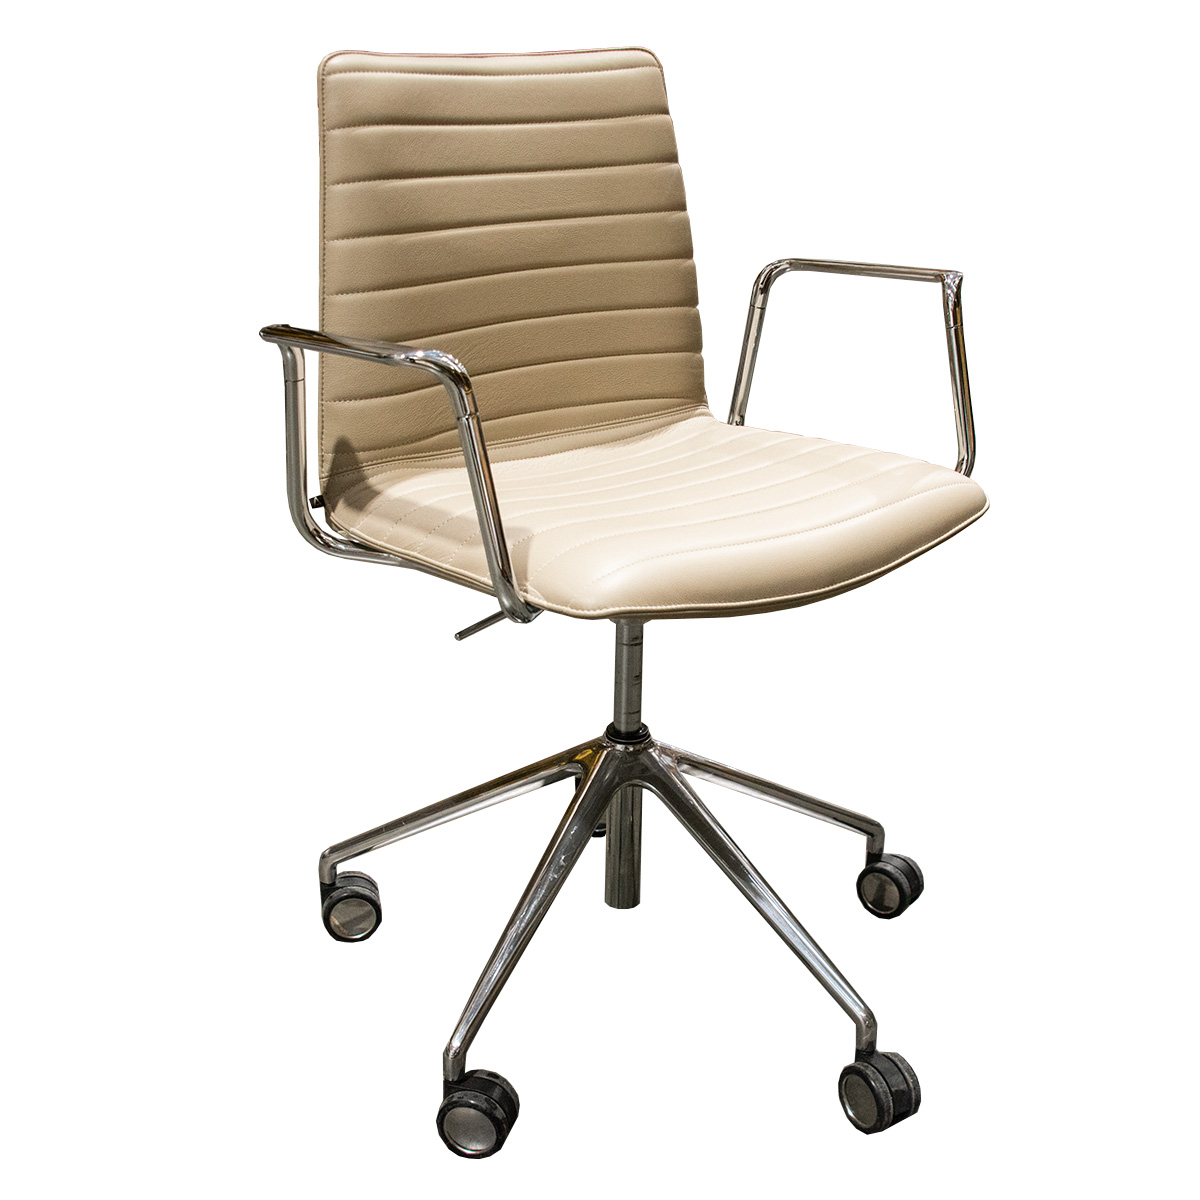 Used Andreu World Flex Corporate Multipurpose Vinyl Chair In Beige W/ Chrome Arms & Base